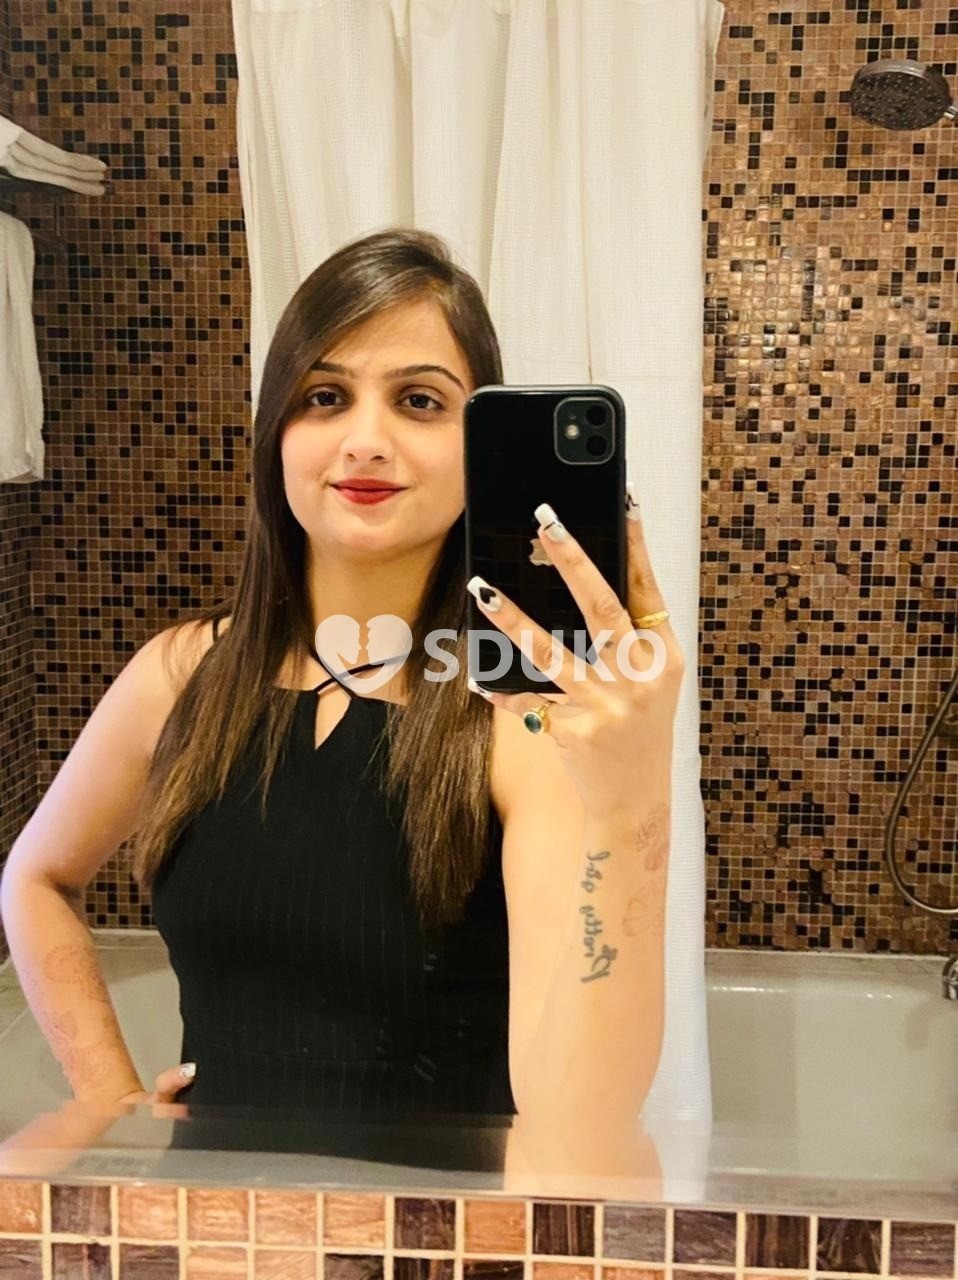 Chembur vv 93513@ 77406 Low price 100% genuine sexy VIP call girls are provided safe and secure service .call ,,24 hours